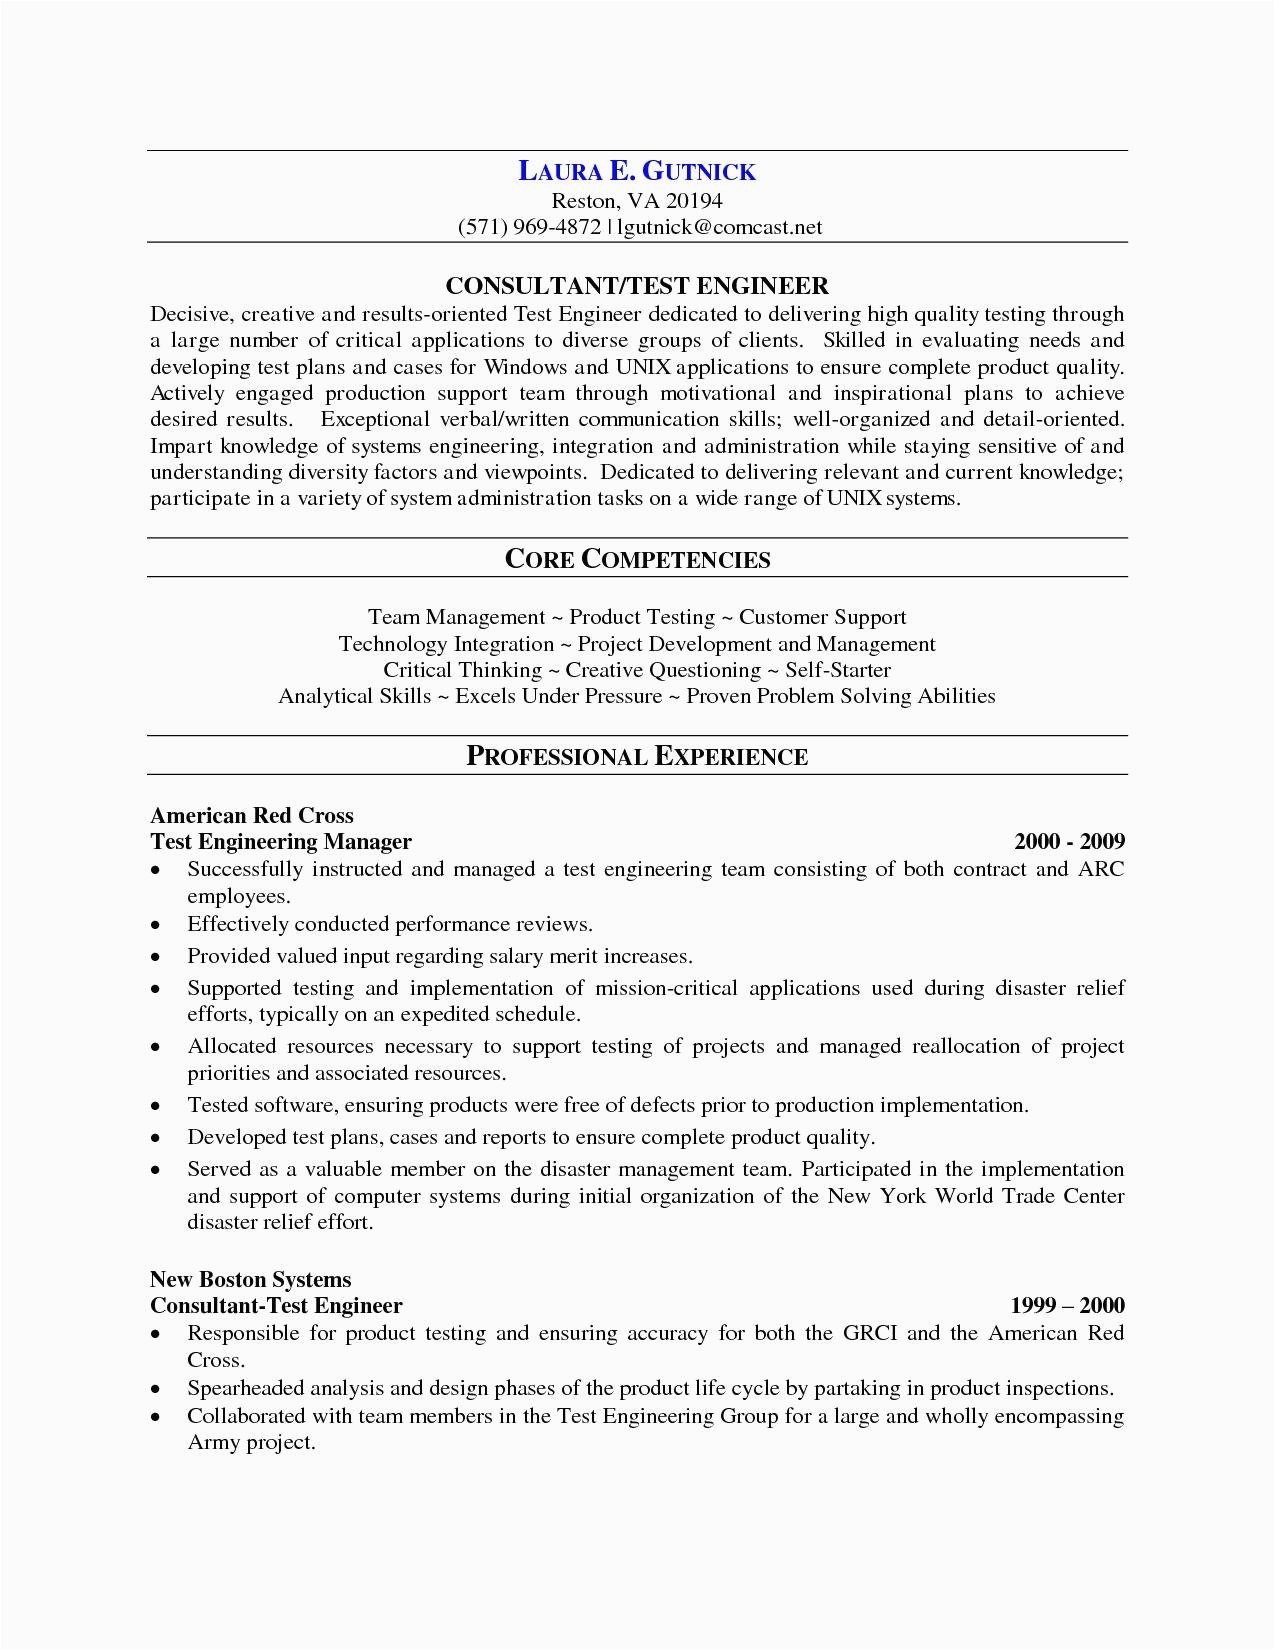 Sample Resume for 2 Years Experience In Unix Sample Resume for software Tester 2 Years Experience